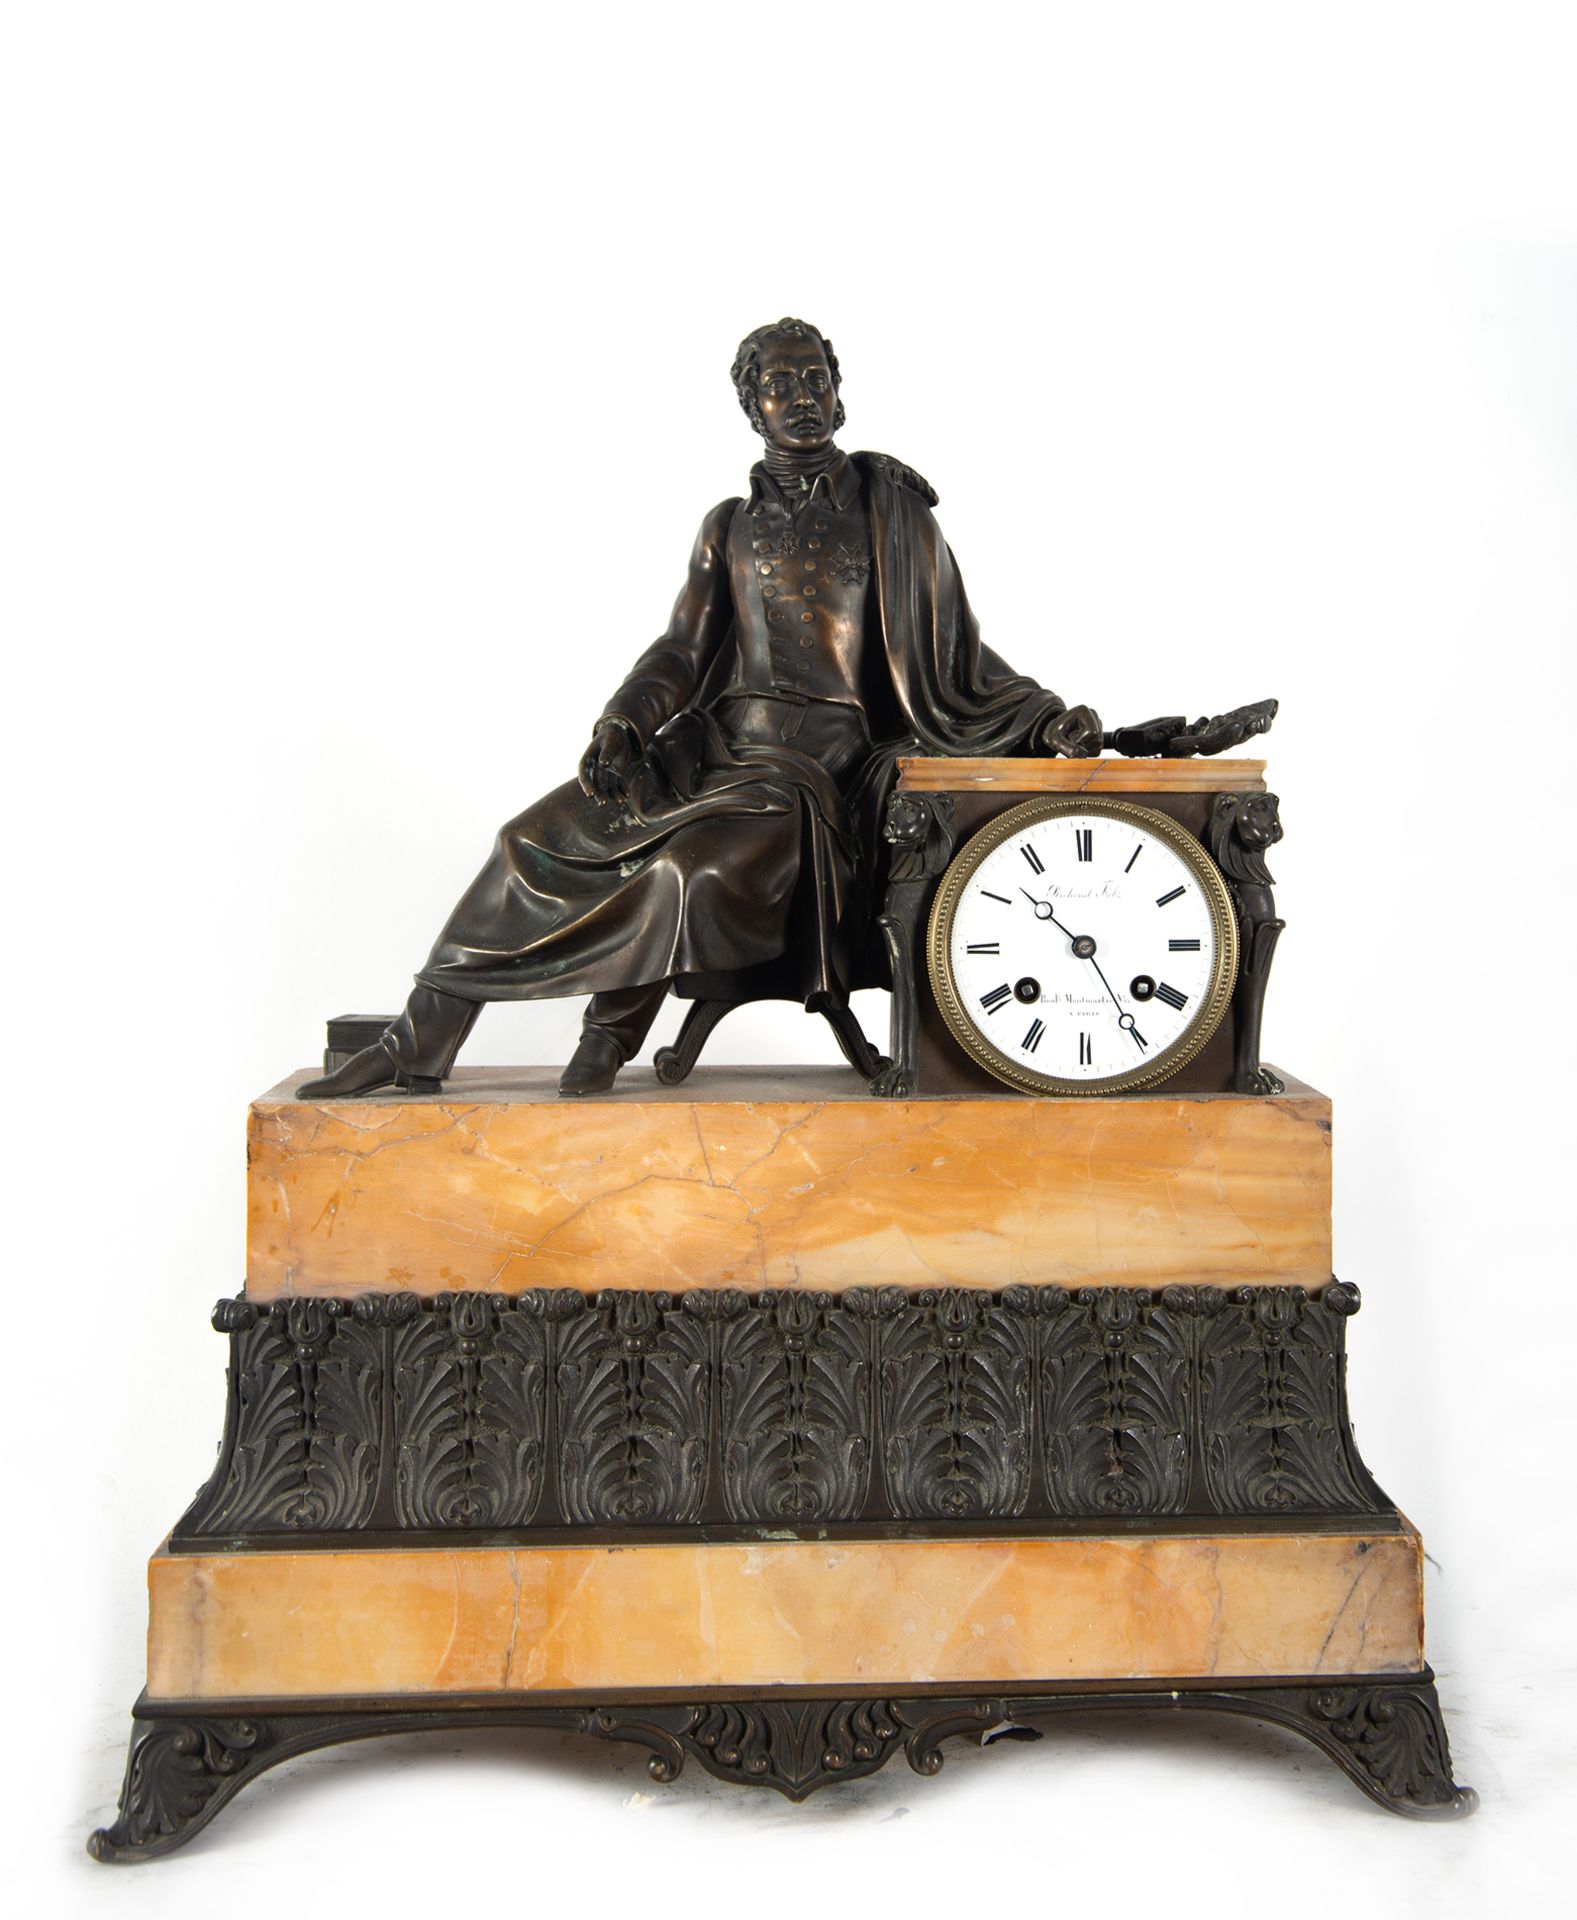 Empire style clock depicting Knight of the French Legion of Honor, 19th century